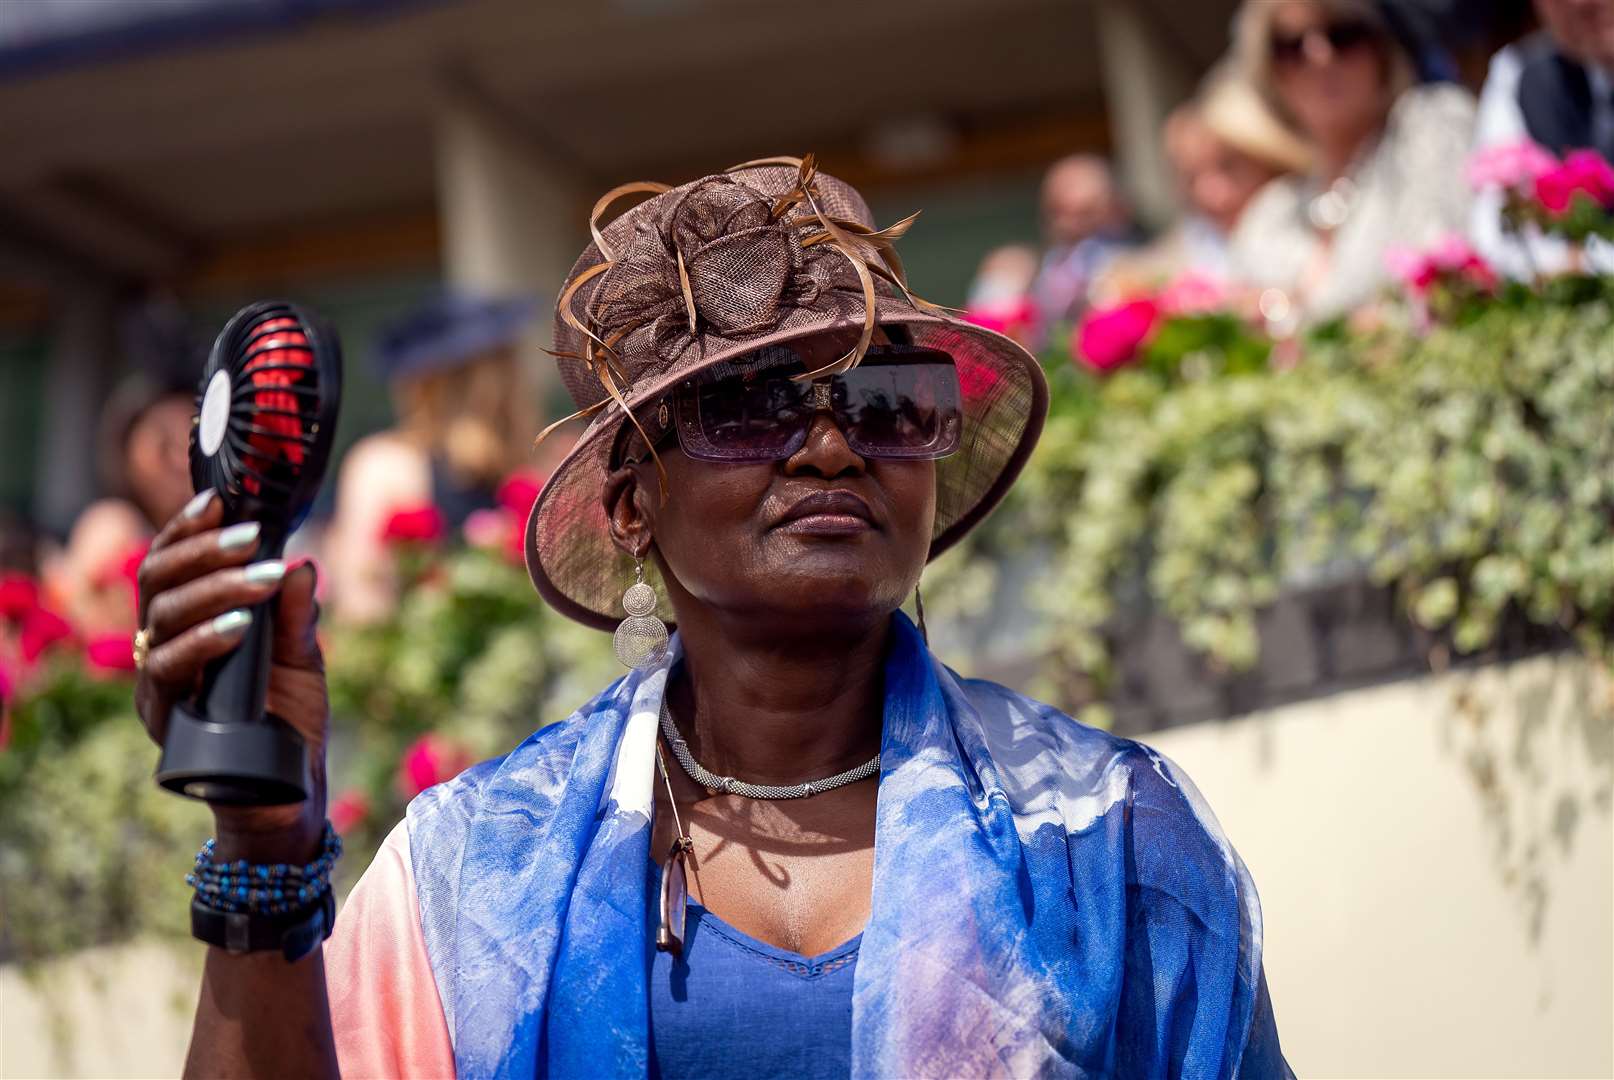 A racegoer uses a fan to stay cool during day three of Royal Ascot at Ascot Racecourse (Aaron Chown/PA)